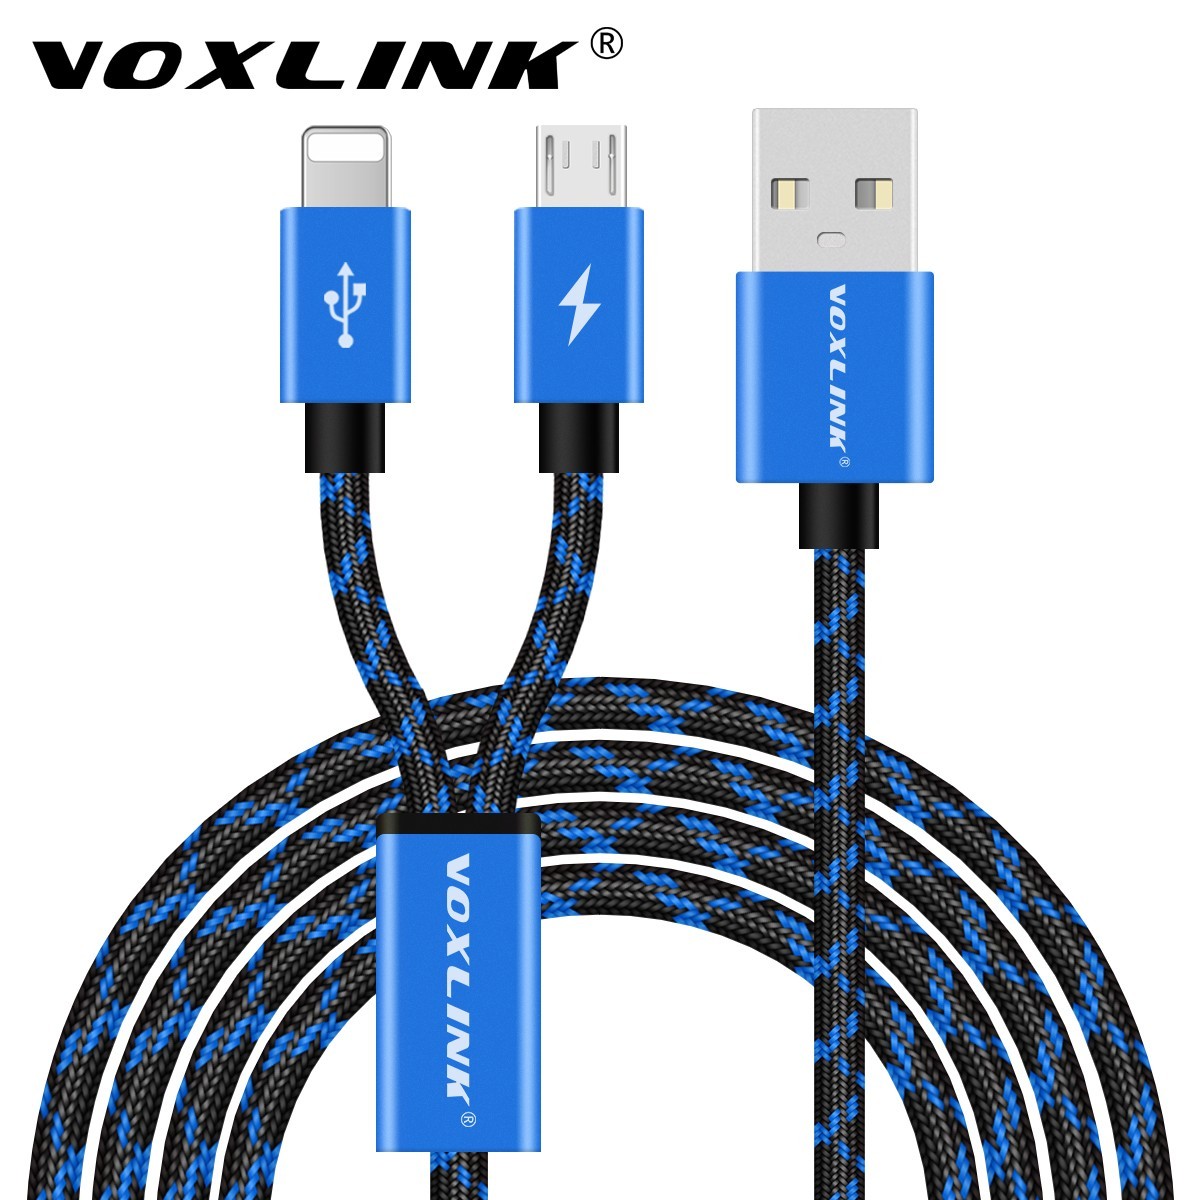 Voxlink 3 in 1 Multi Connector Cable Micro USB Type-C iOS Universal Interface Android iOS Compatible Durable Nylon Braided Charge Data Transfer Wire